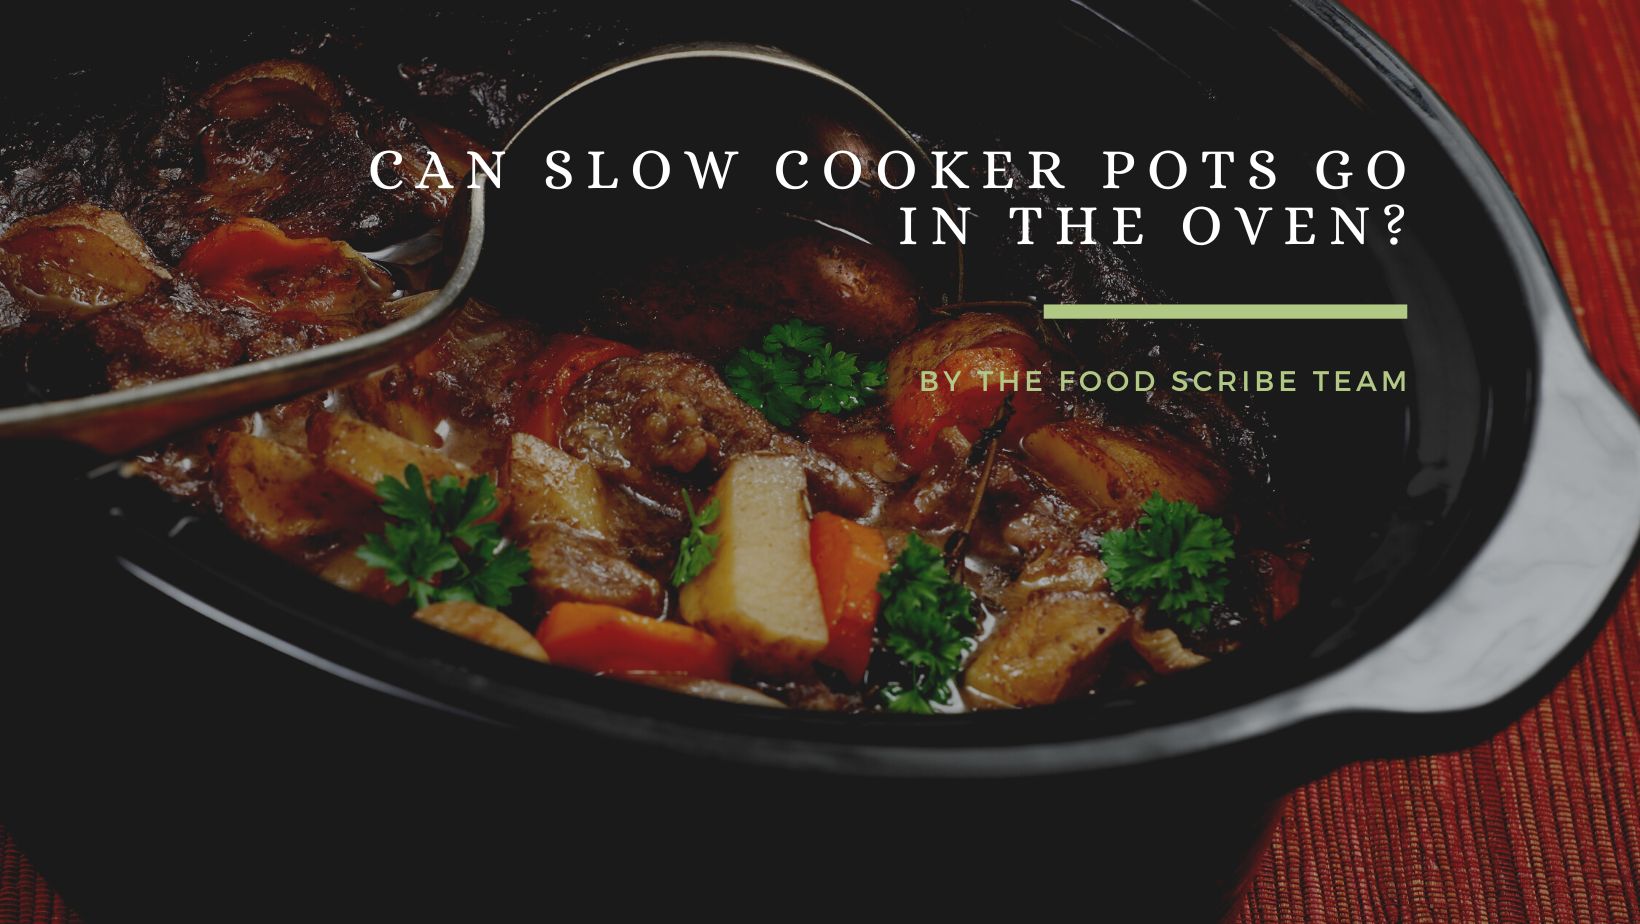 Can Slow Cooker Pots Go In the Oven